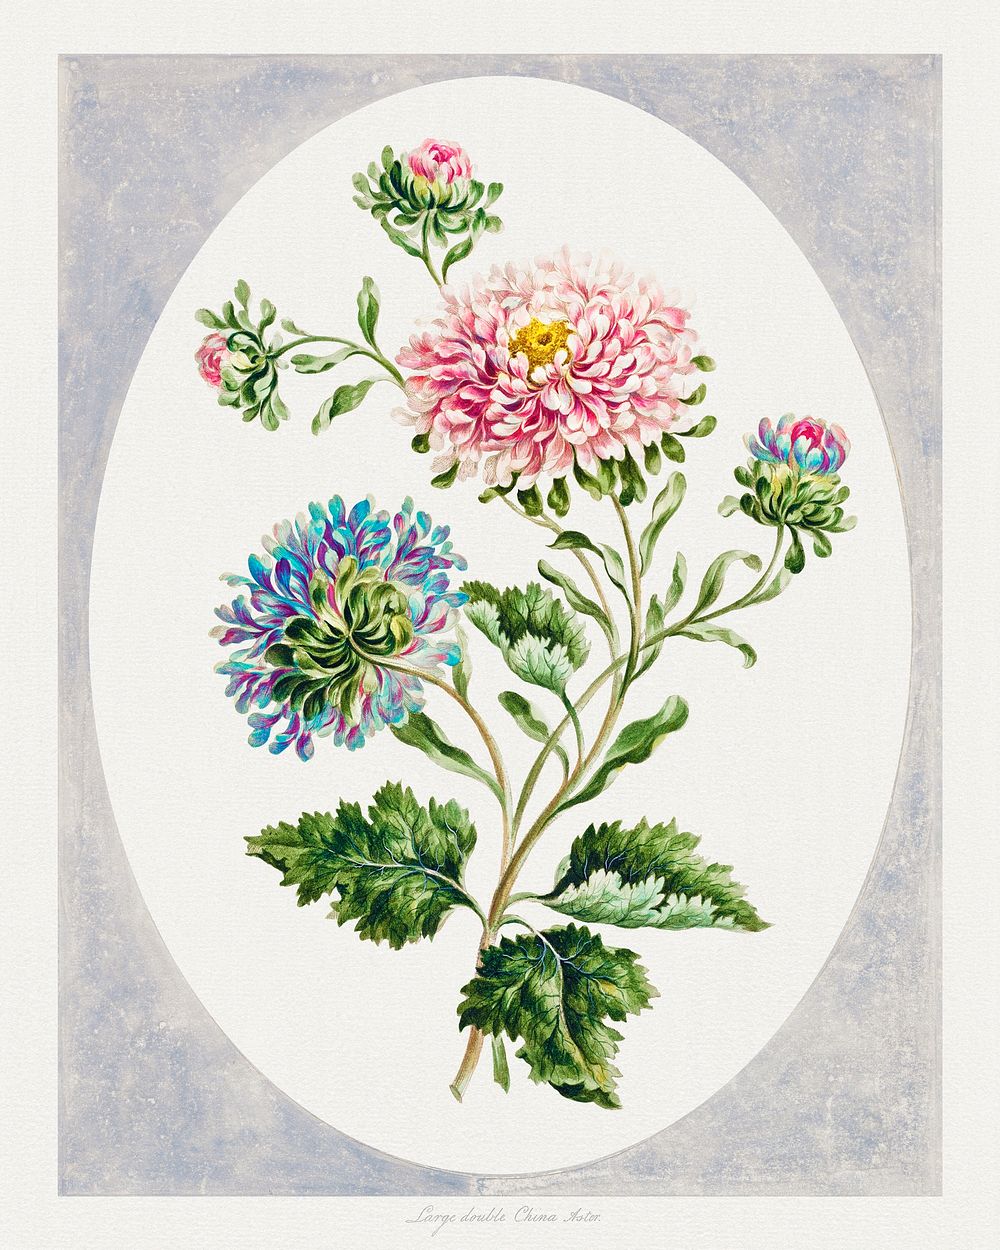 A Collection of Flowers Drawn from Nature: Large Double China Aster (1798) by John Edwards. Original from The Cleveland…